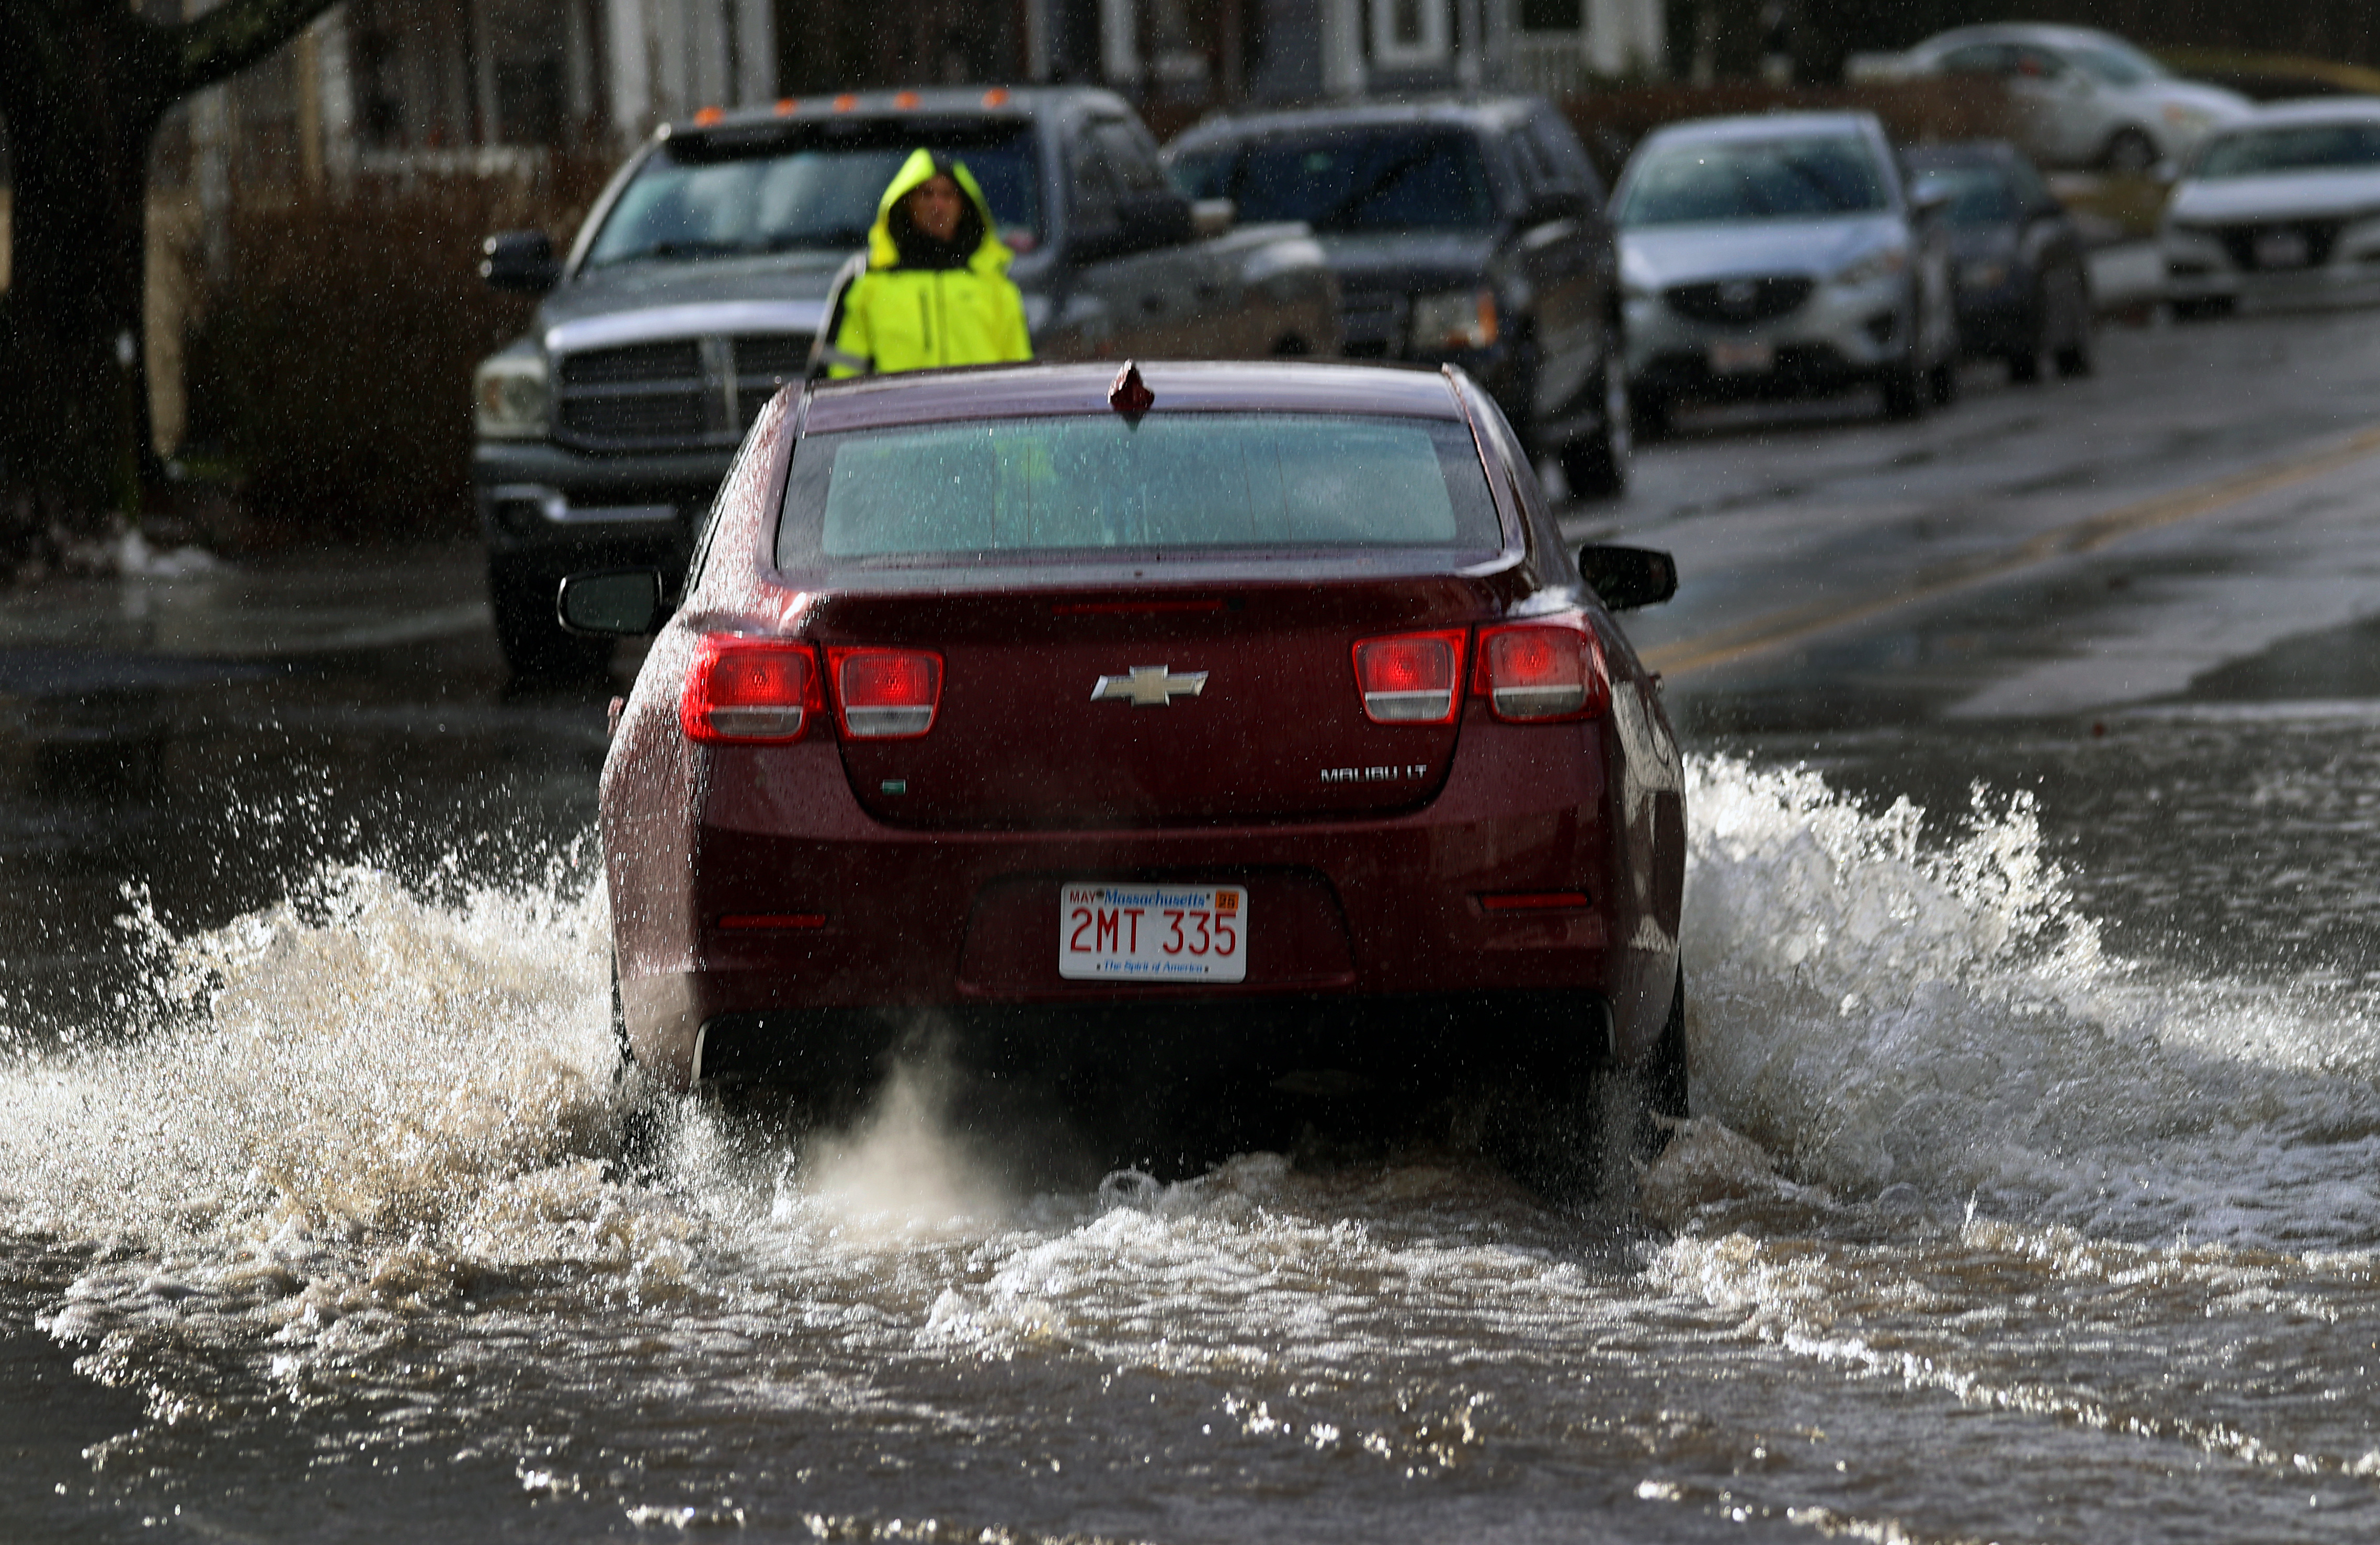 New England storm: Region sees flooding, evacuations, power outages